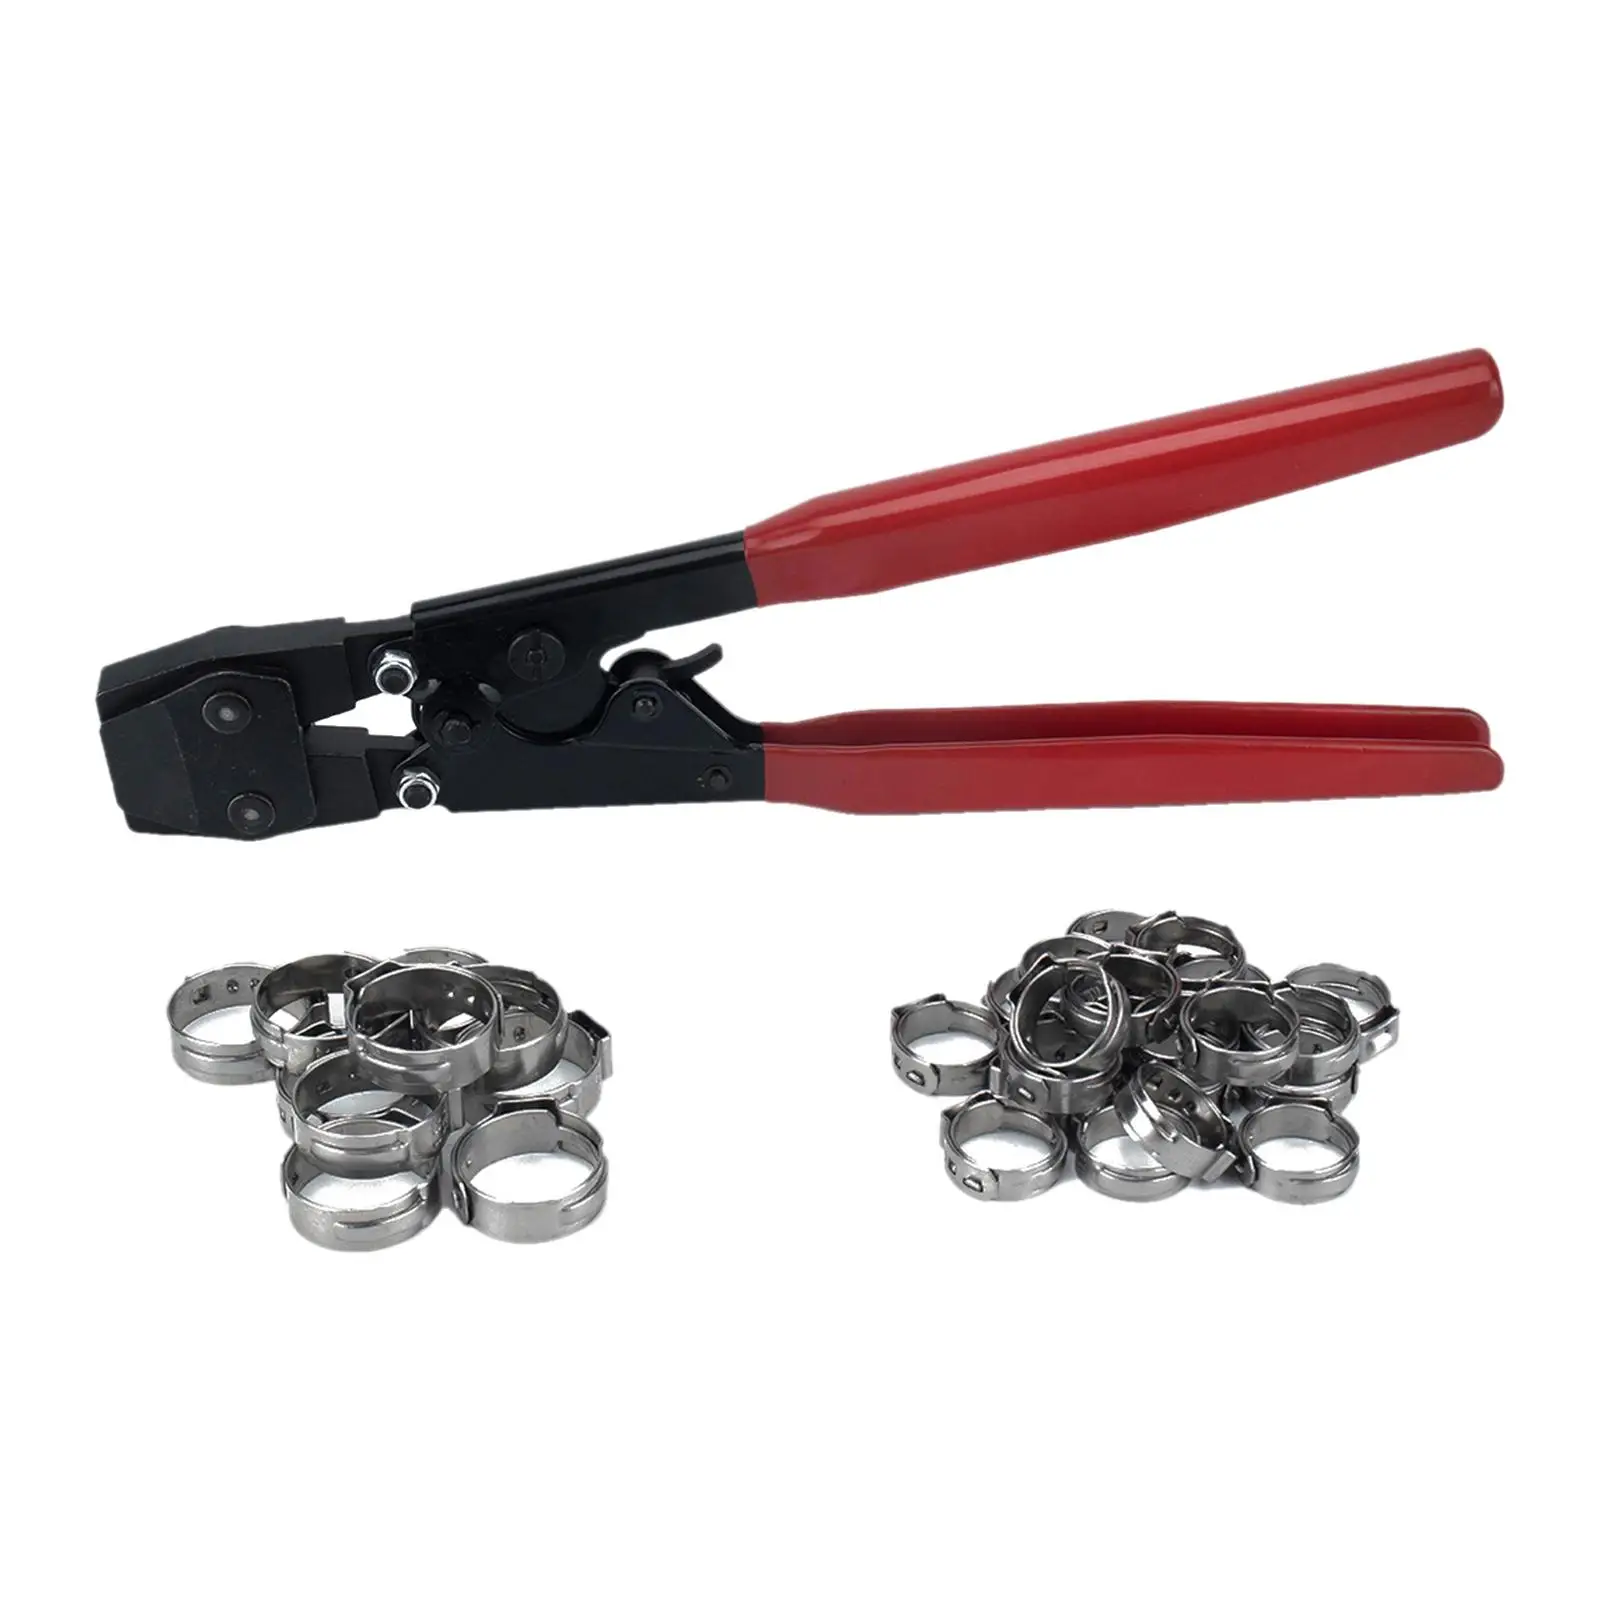 Pex Cinch Clamp Crimping Tool Water Pipe Crimping Pliers with Comfort Long Handle